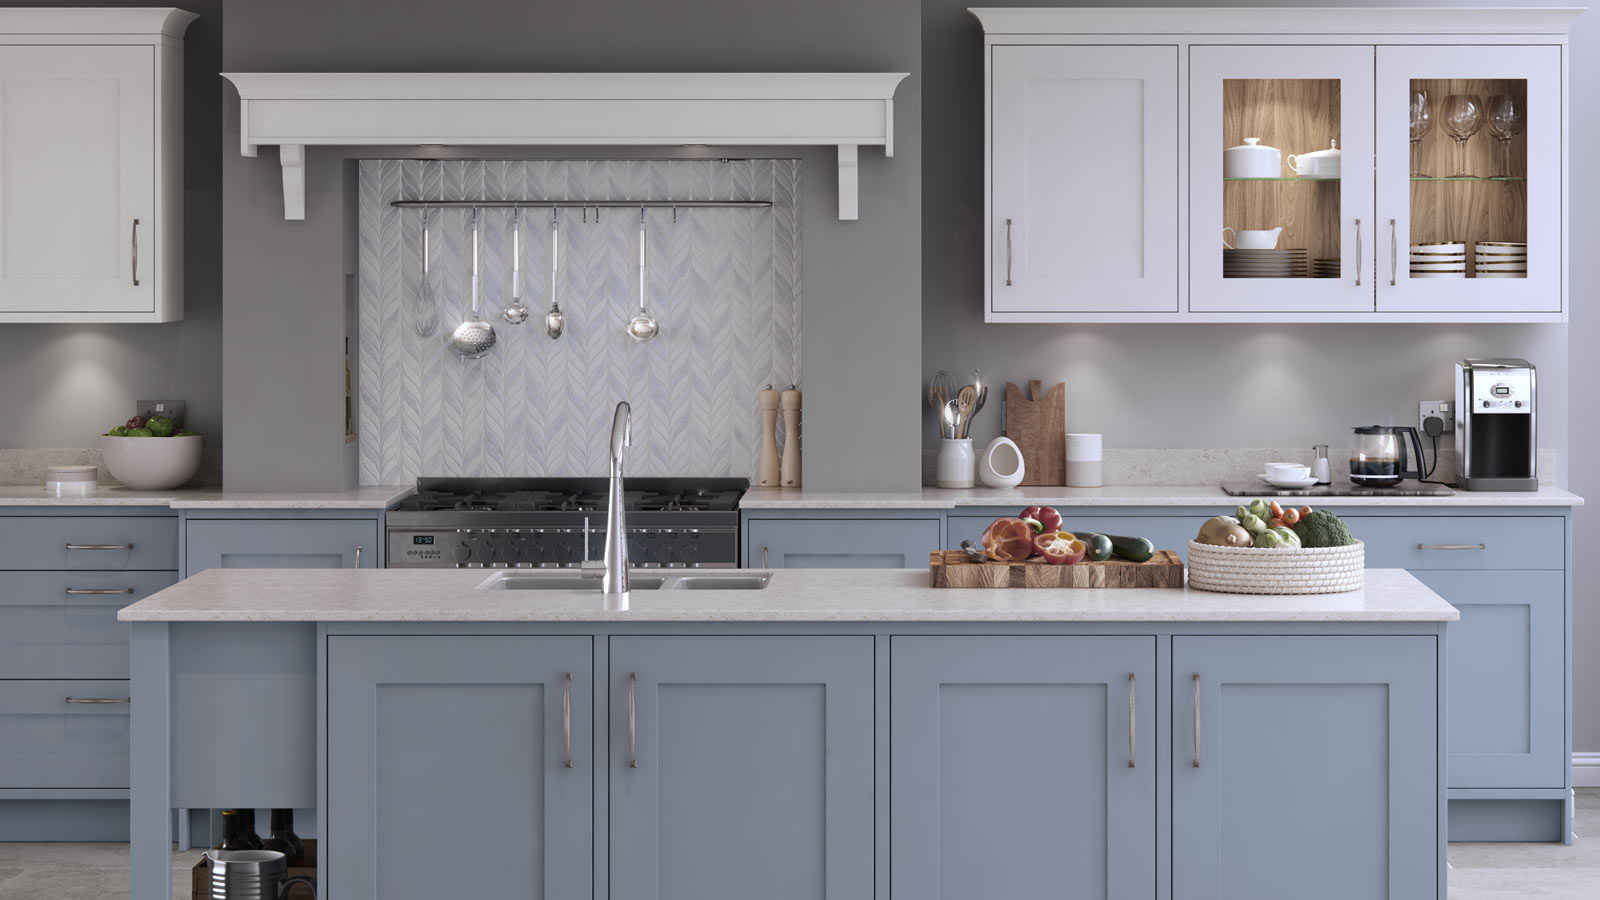 A traditional kitchen with powder blue Shaker kitchen doors